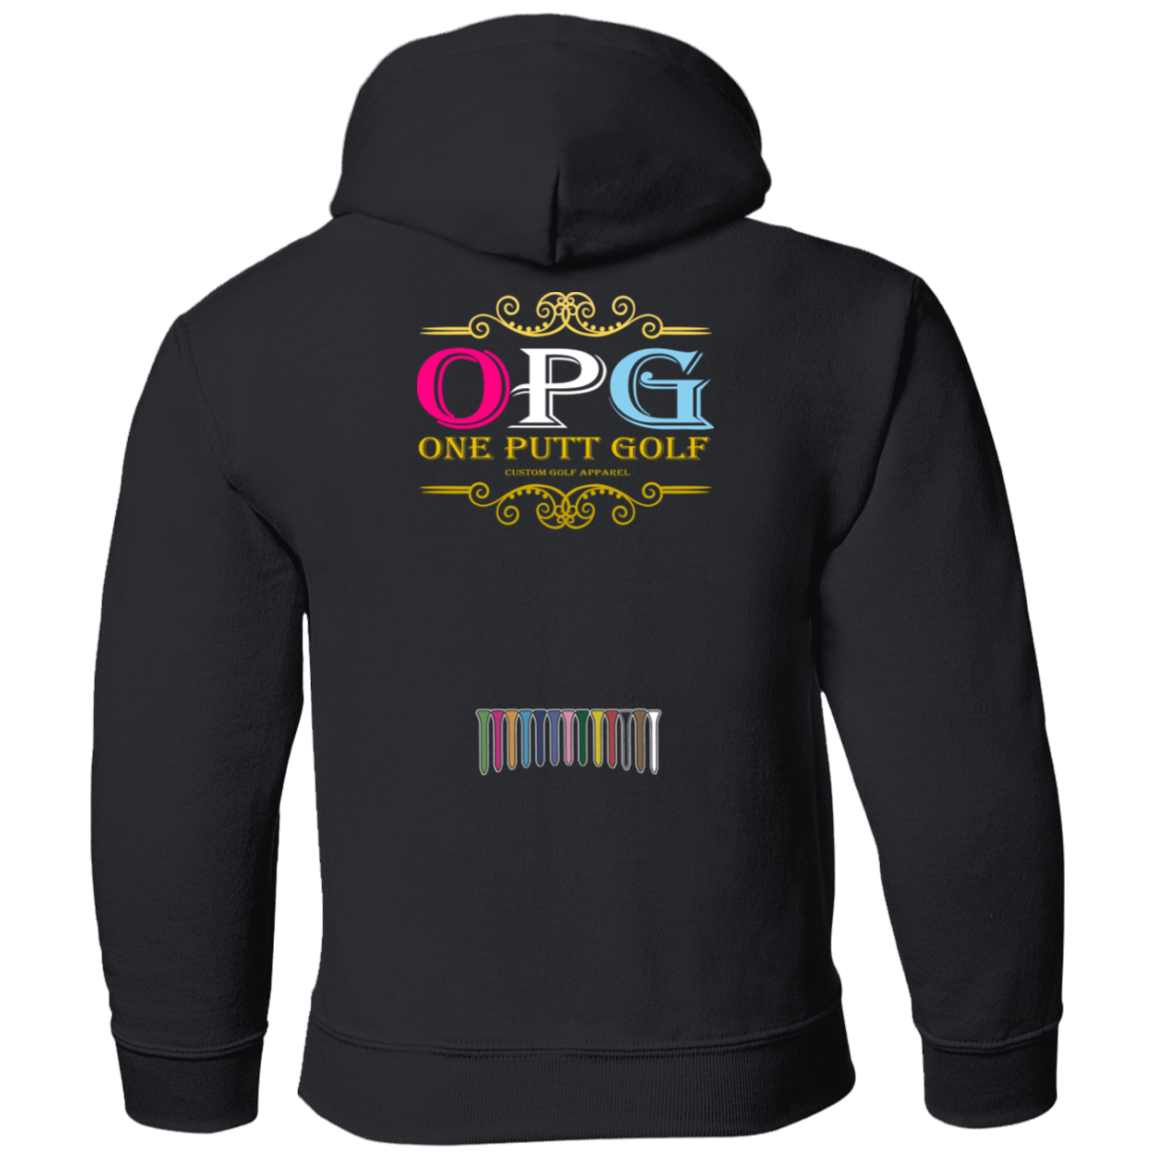 OPG Custom Design #6. Driveristee & Inclusion. Youth Pullover Hoodie